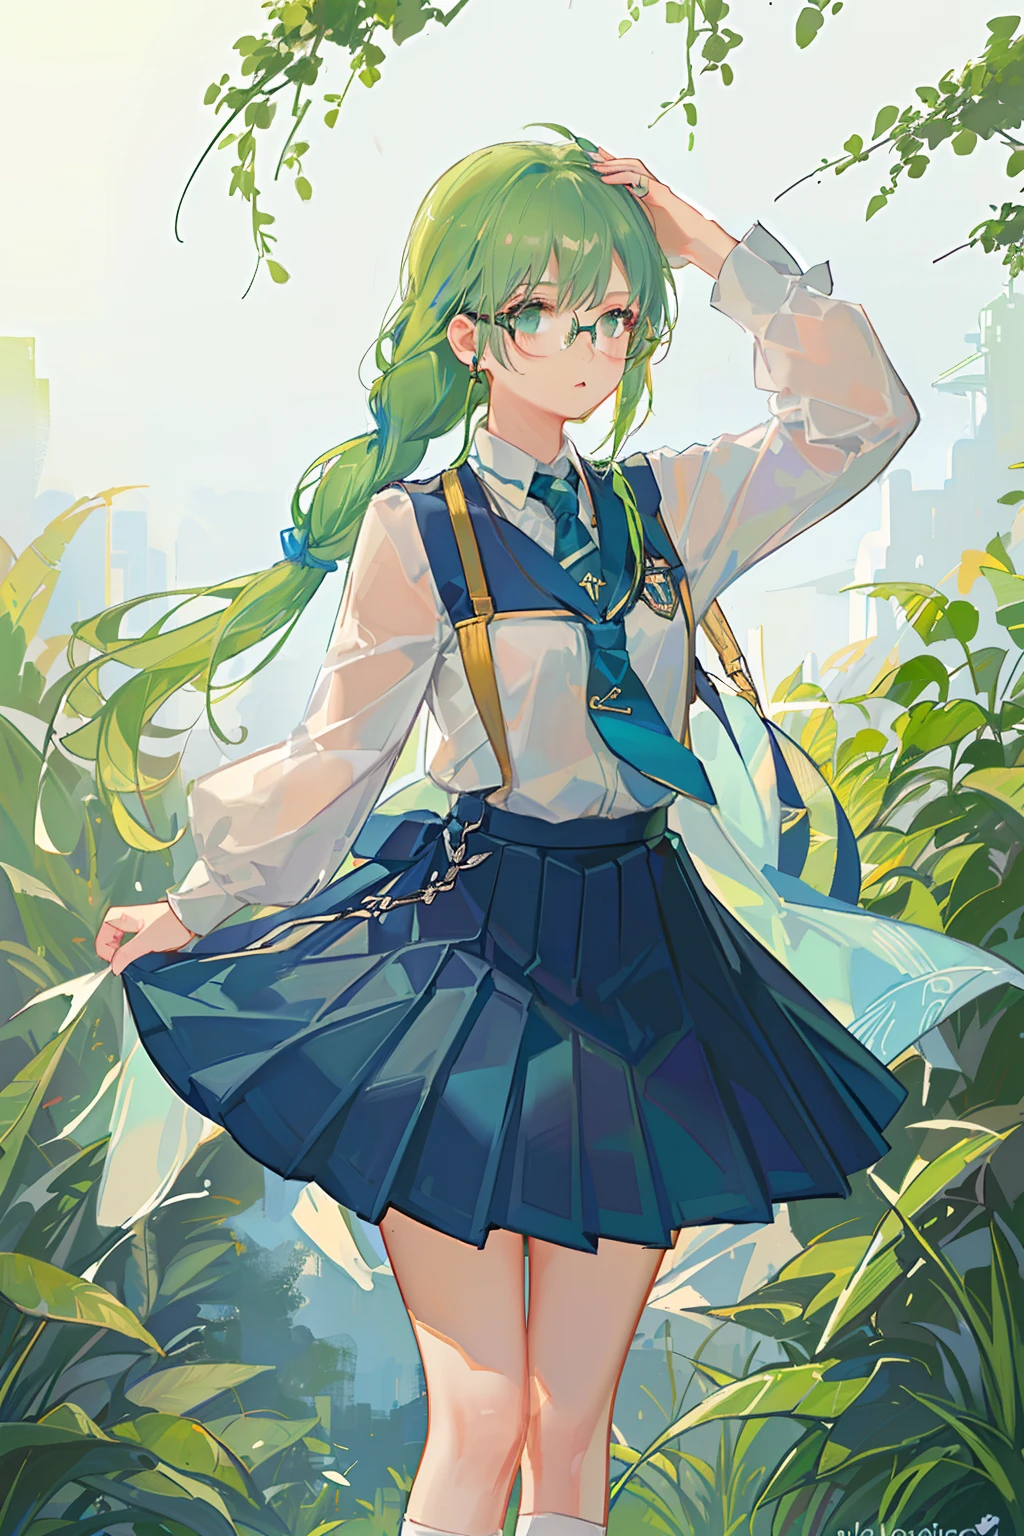 4K, best quality, 1 girl, 18 years old, light green hair, double layer fried dough braid, fried dough braid tied behind ears, dark blue tie. Dark blue pleated skirt, strap on skirt, glasses, vitality, vitality, girl, forest, small animal